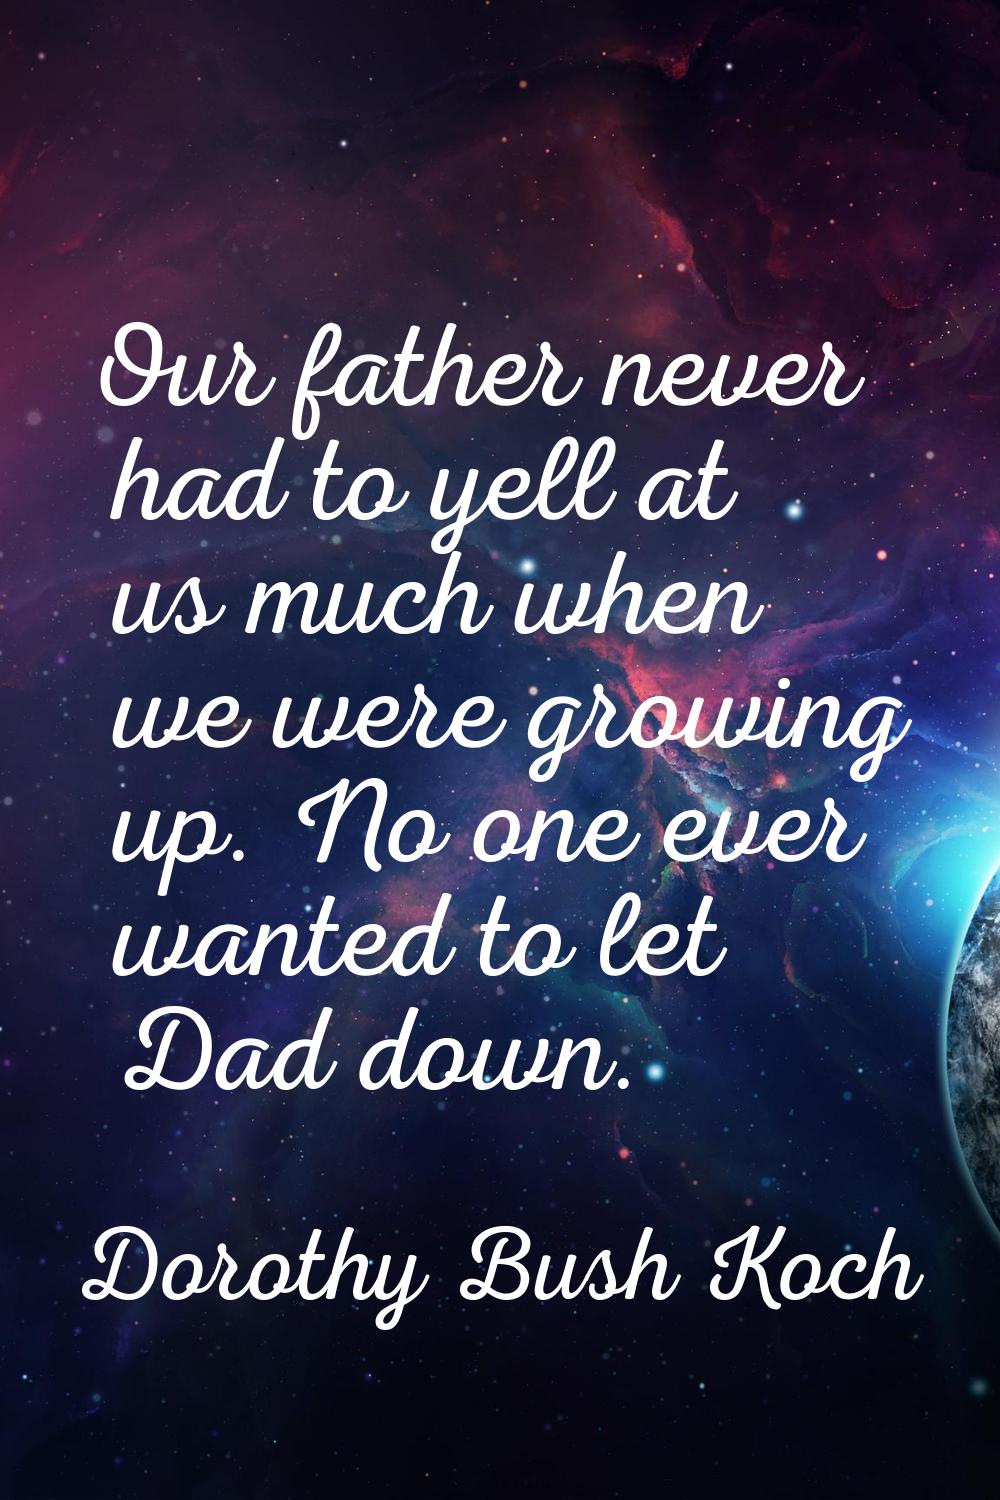 Our father never had to yell at us much when we were growing up. No one ever wanted to let Dad down